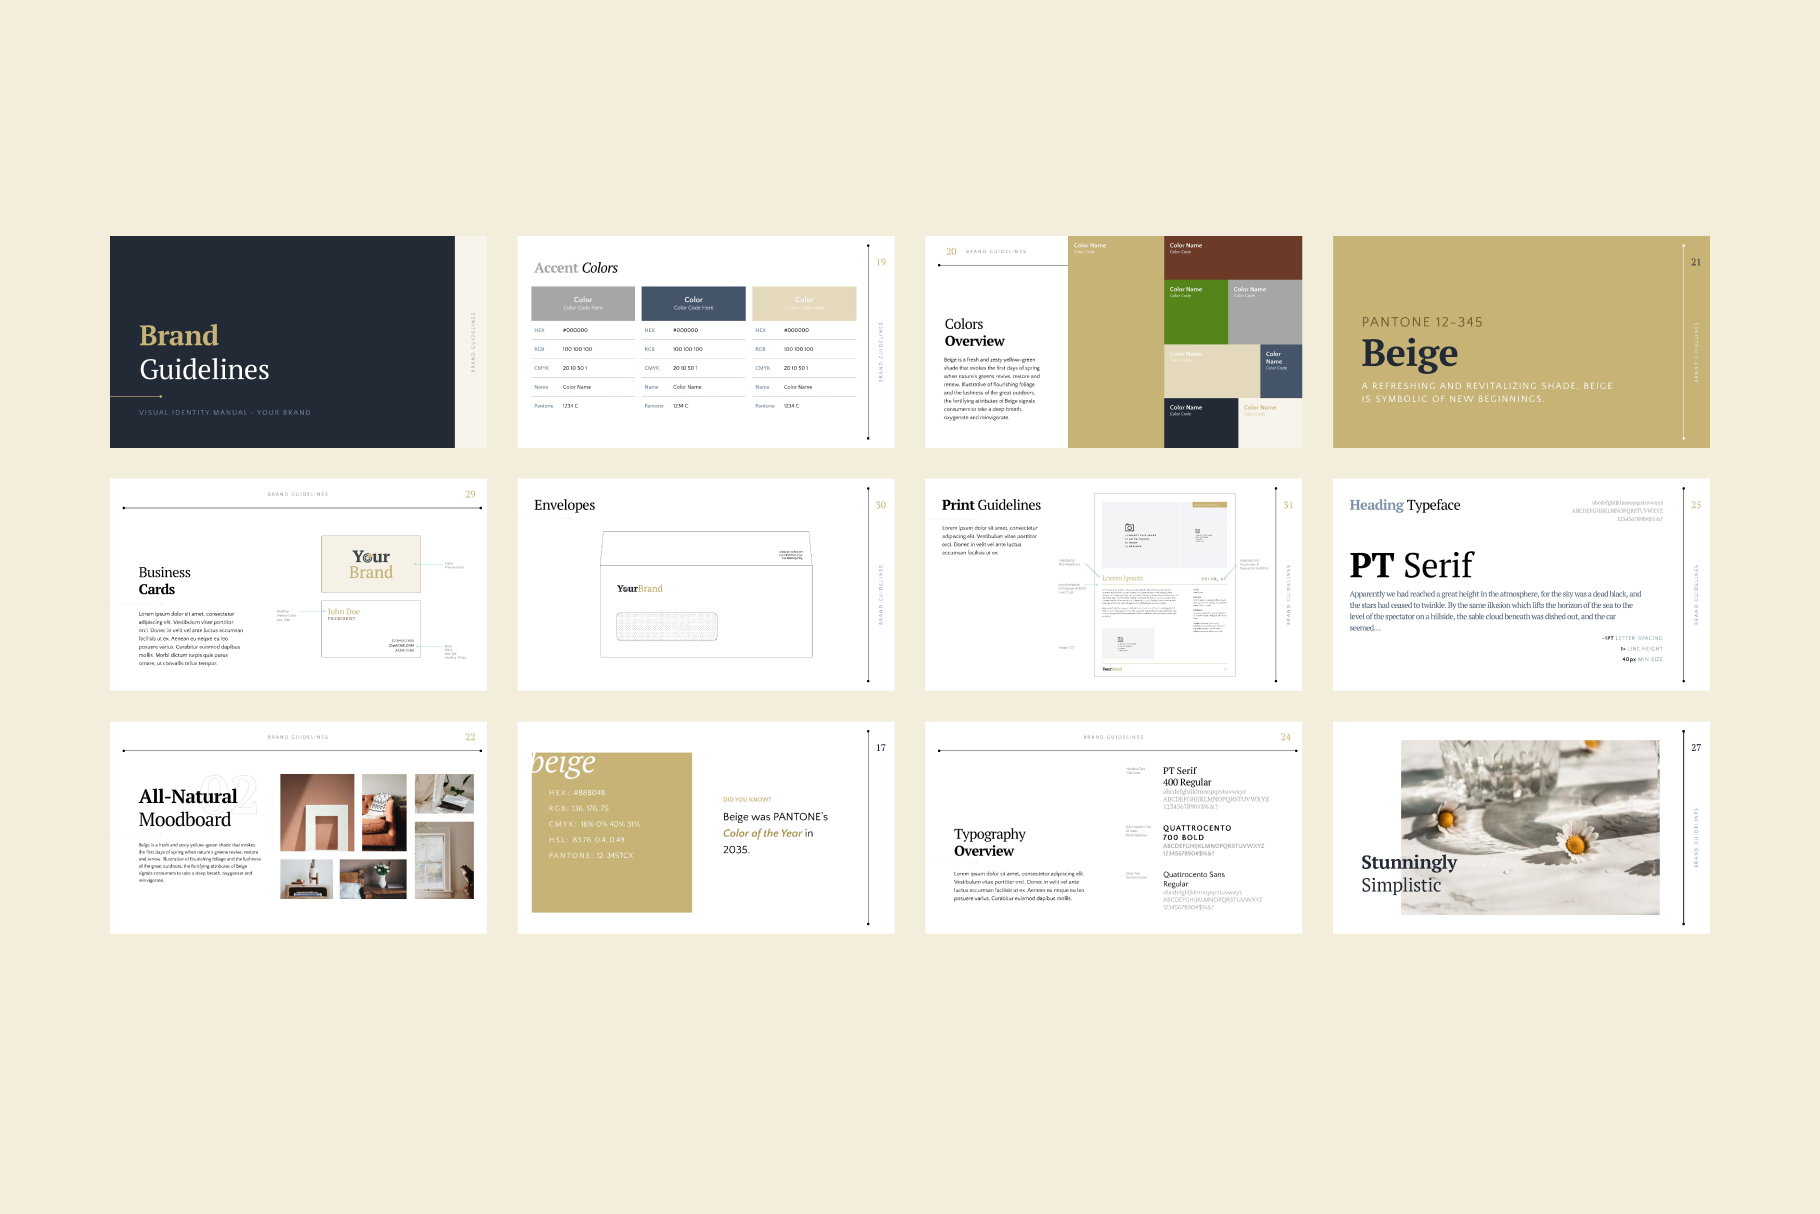 Brand Identity Guidelines Template for PowerPoint